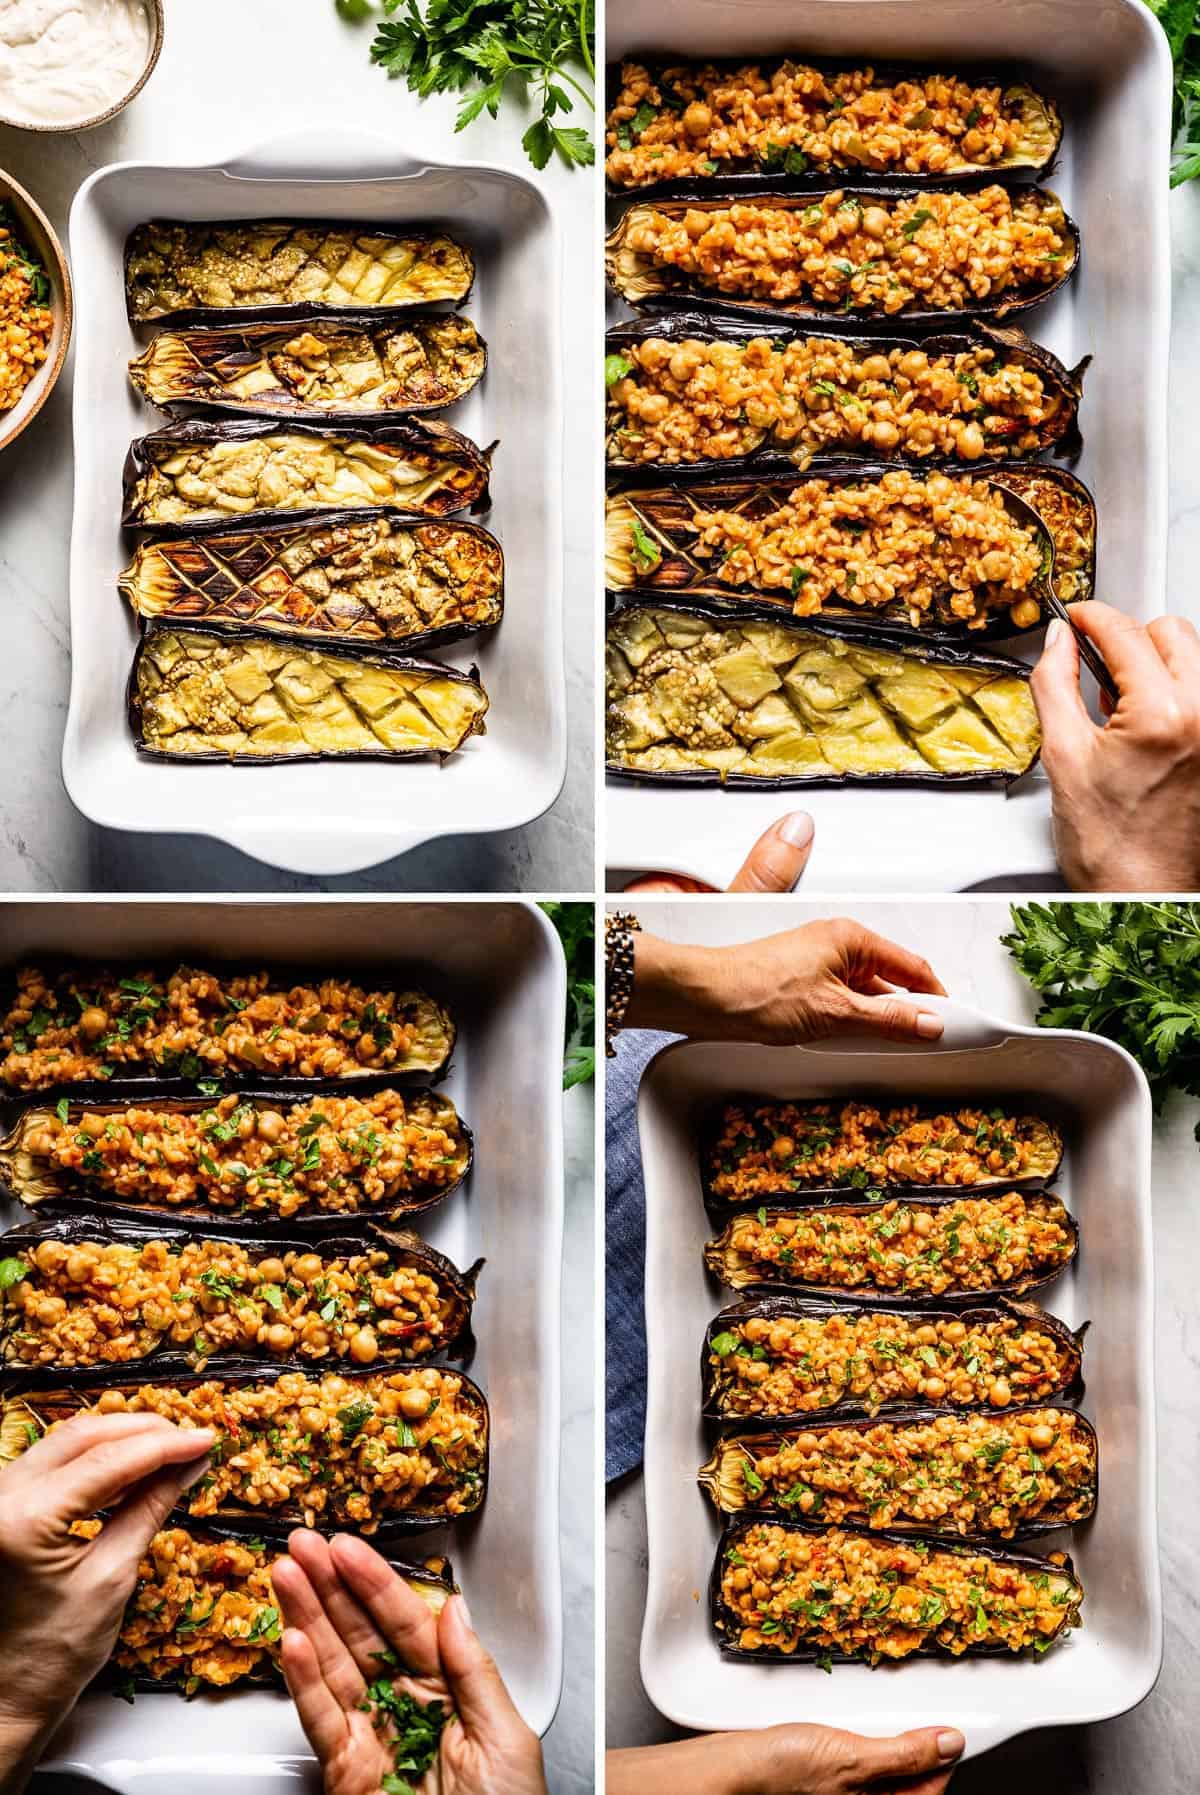 Person showing How To Make Stuffed Eggplant in four images